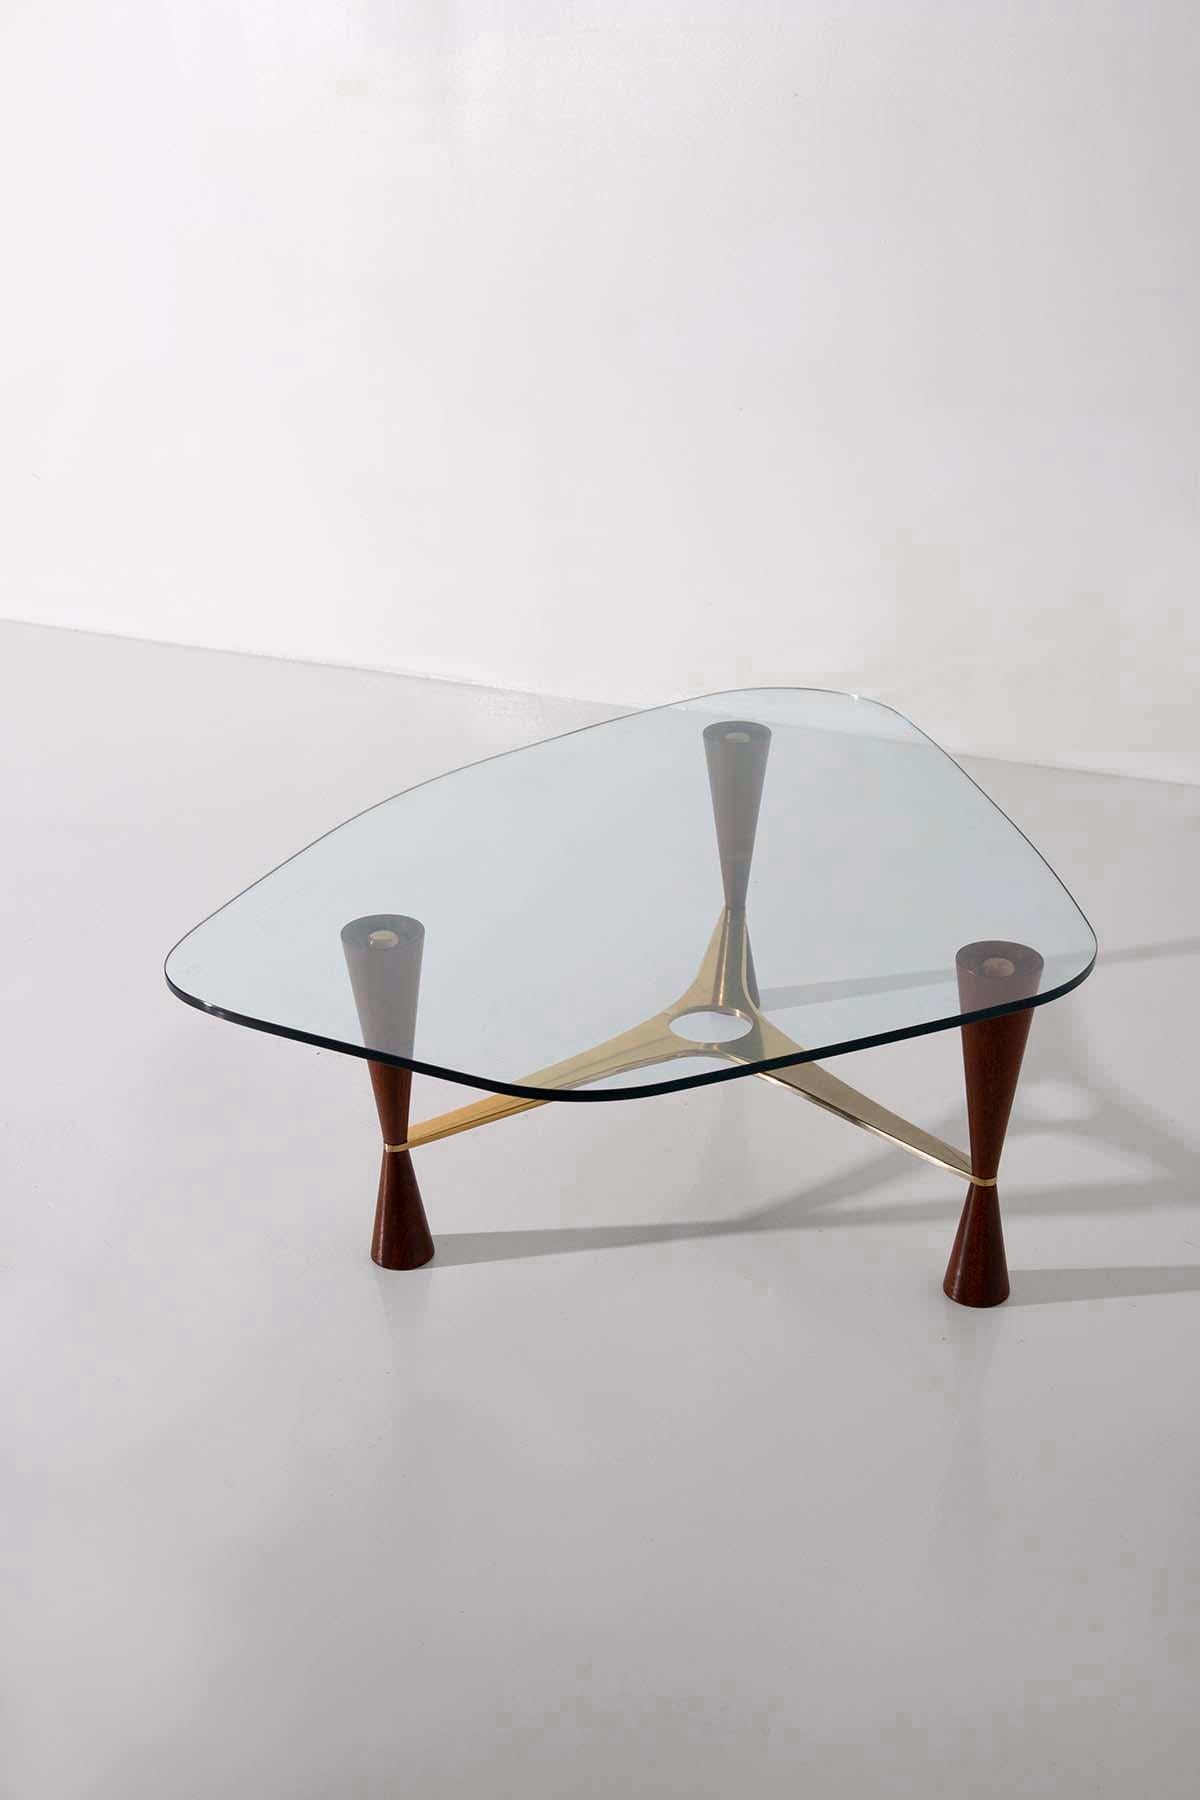 Transport yourself to the sleek and sophisticated world of 1960s American design with an exquisite creation by Edward Wormley – a coffee table that embodies fluidity and elegance. This is not just a table; it's a piece of  that encapsulates the